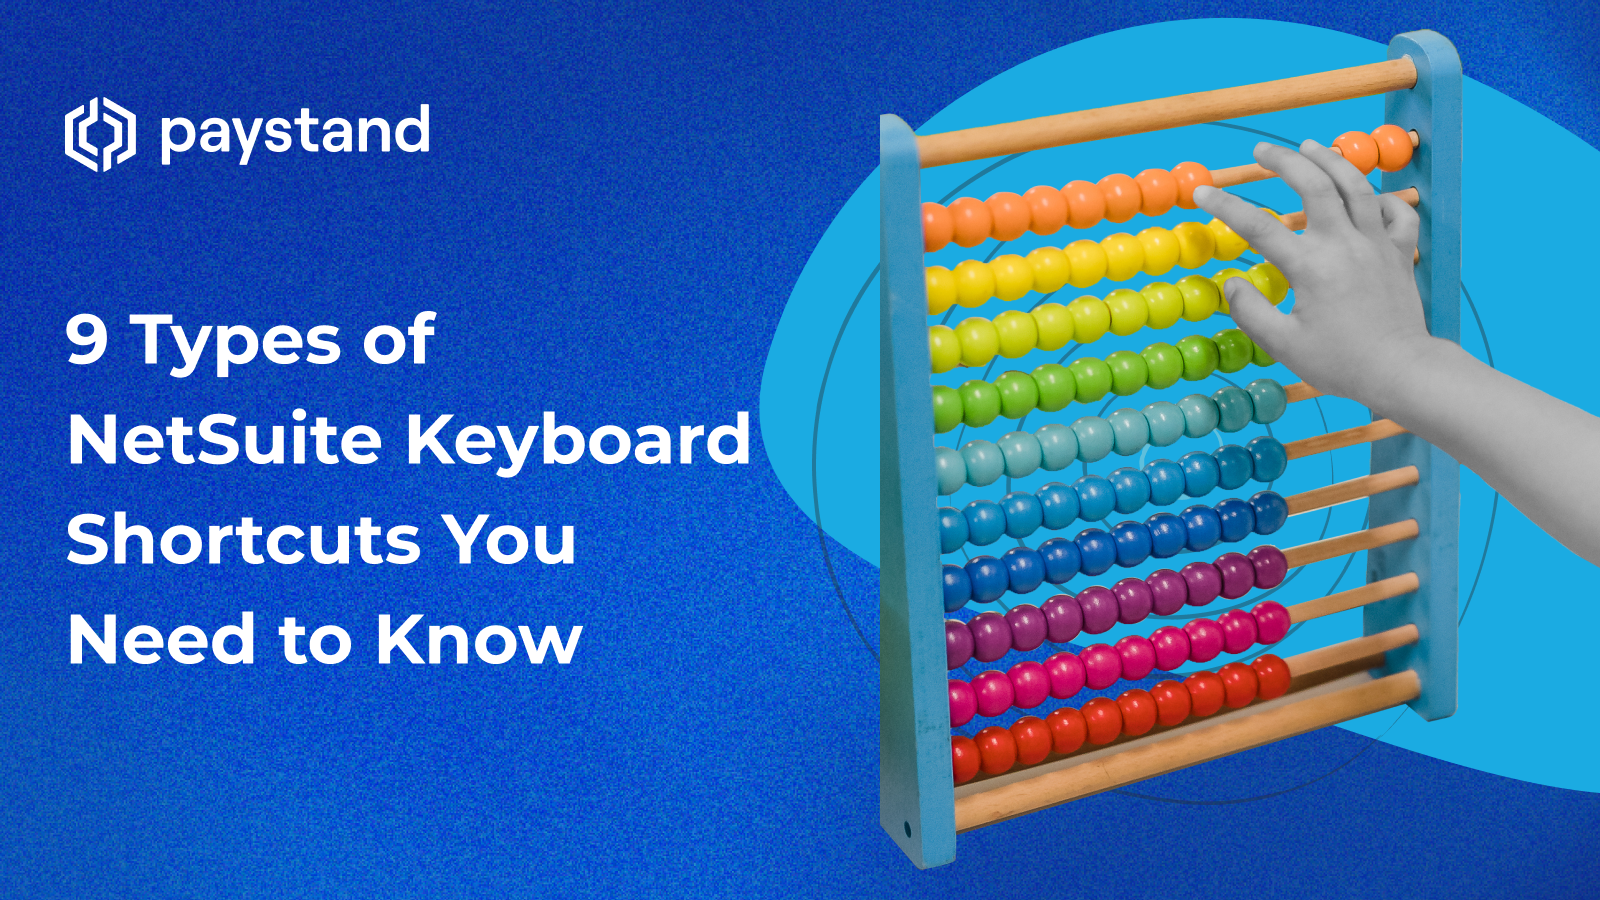 9 Types of NetSuite Keyboard Shortcuts You Need to Know